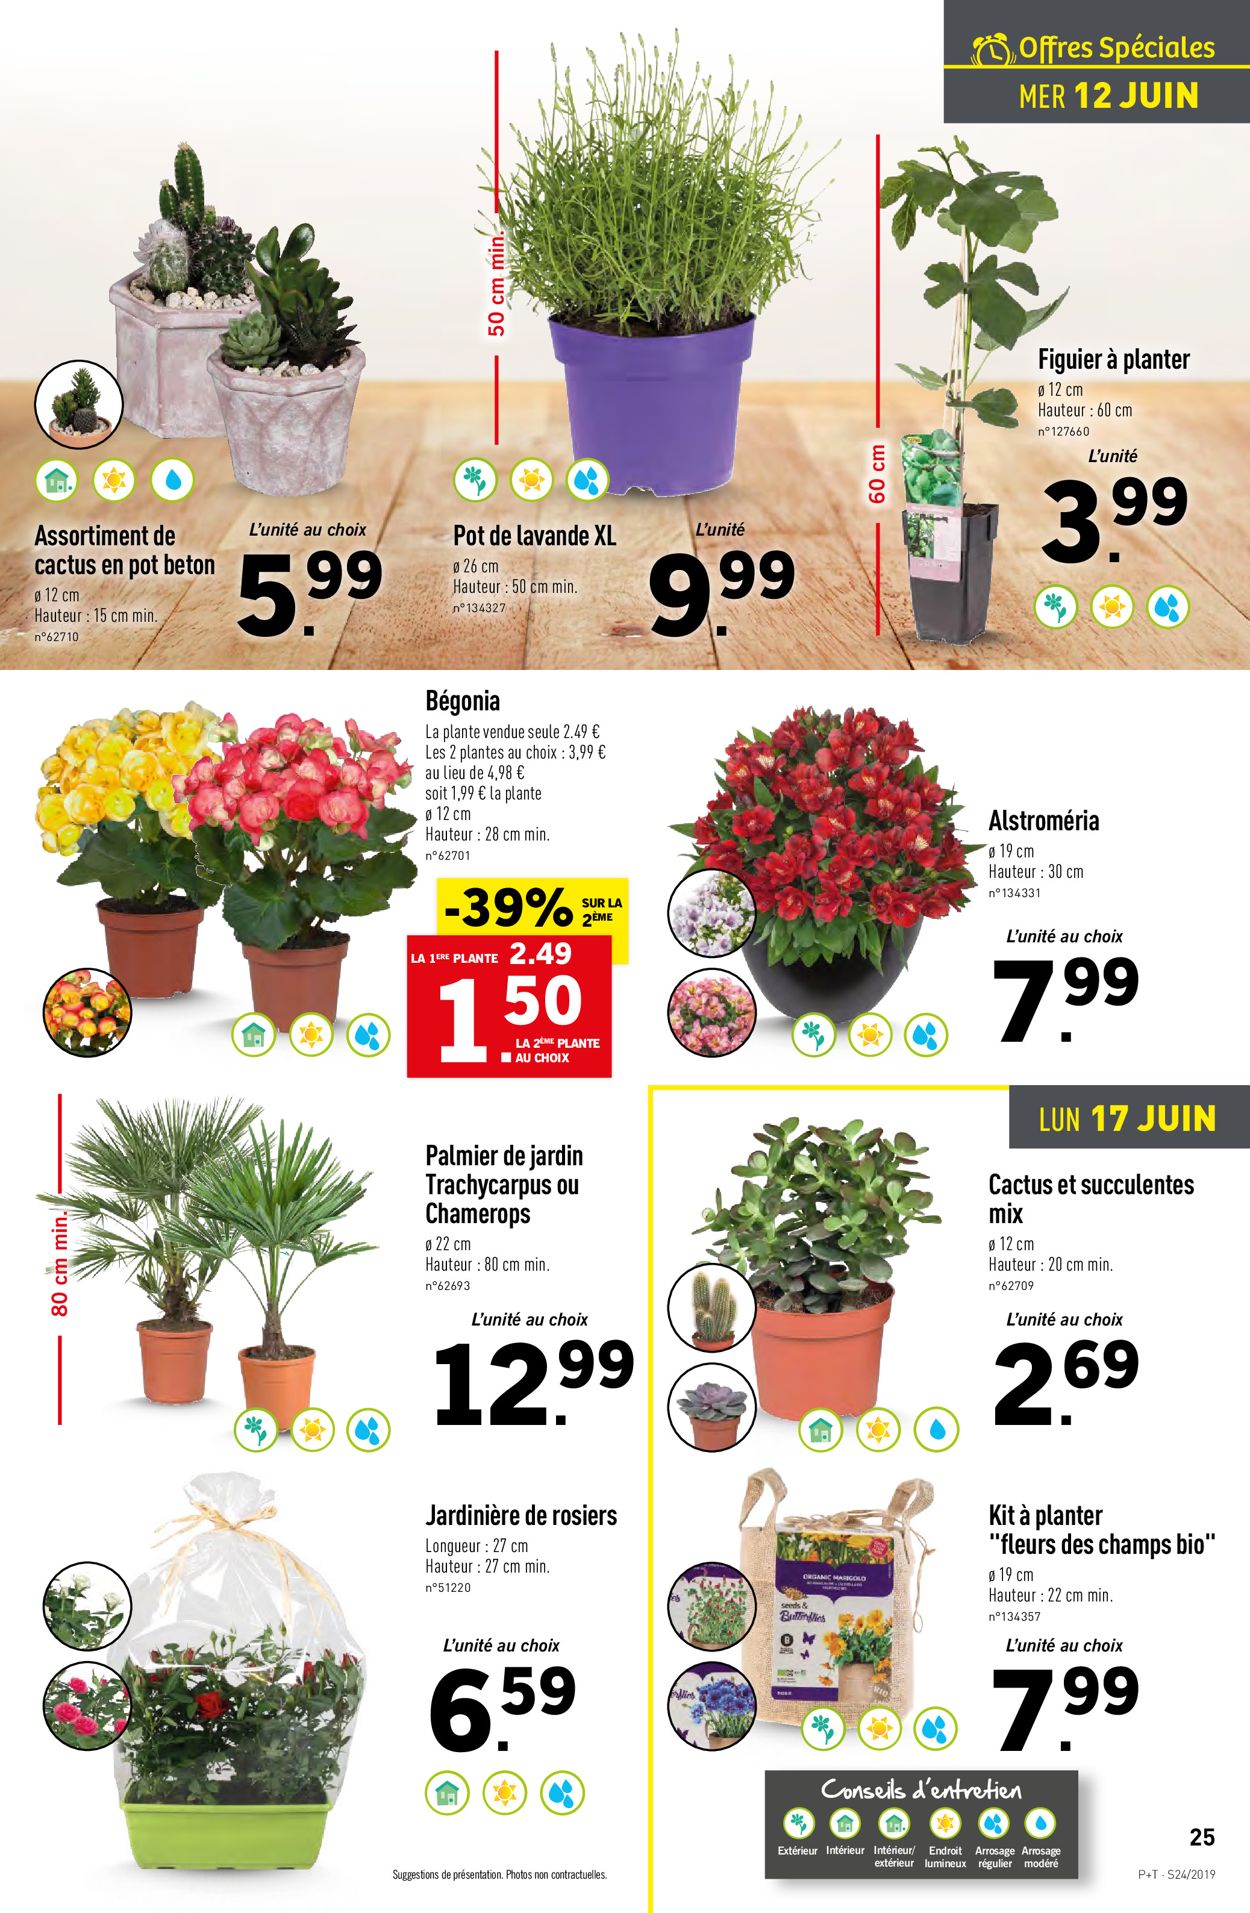 Lidl Catalogue - 12.06-18.06.2019 (Page 27)